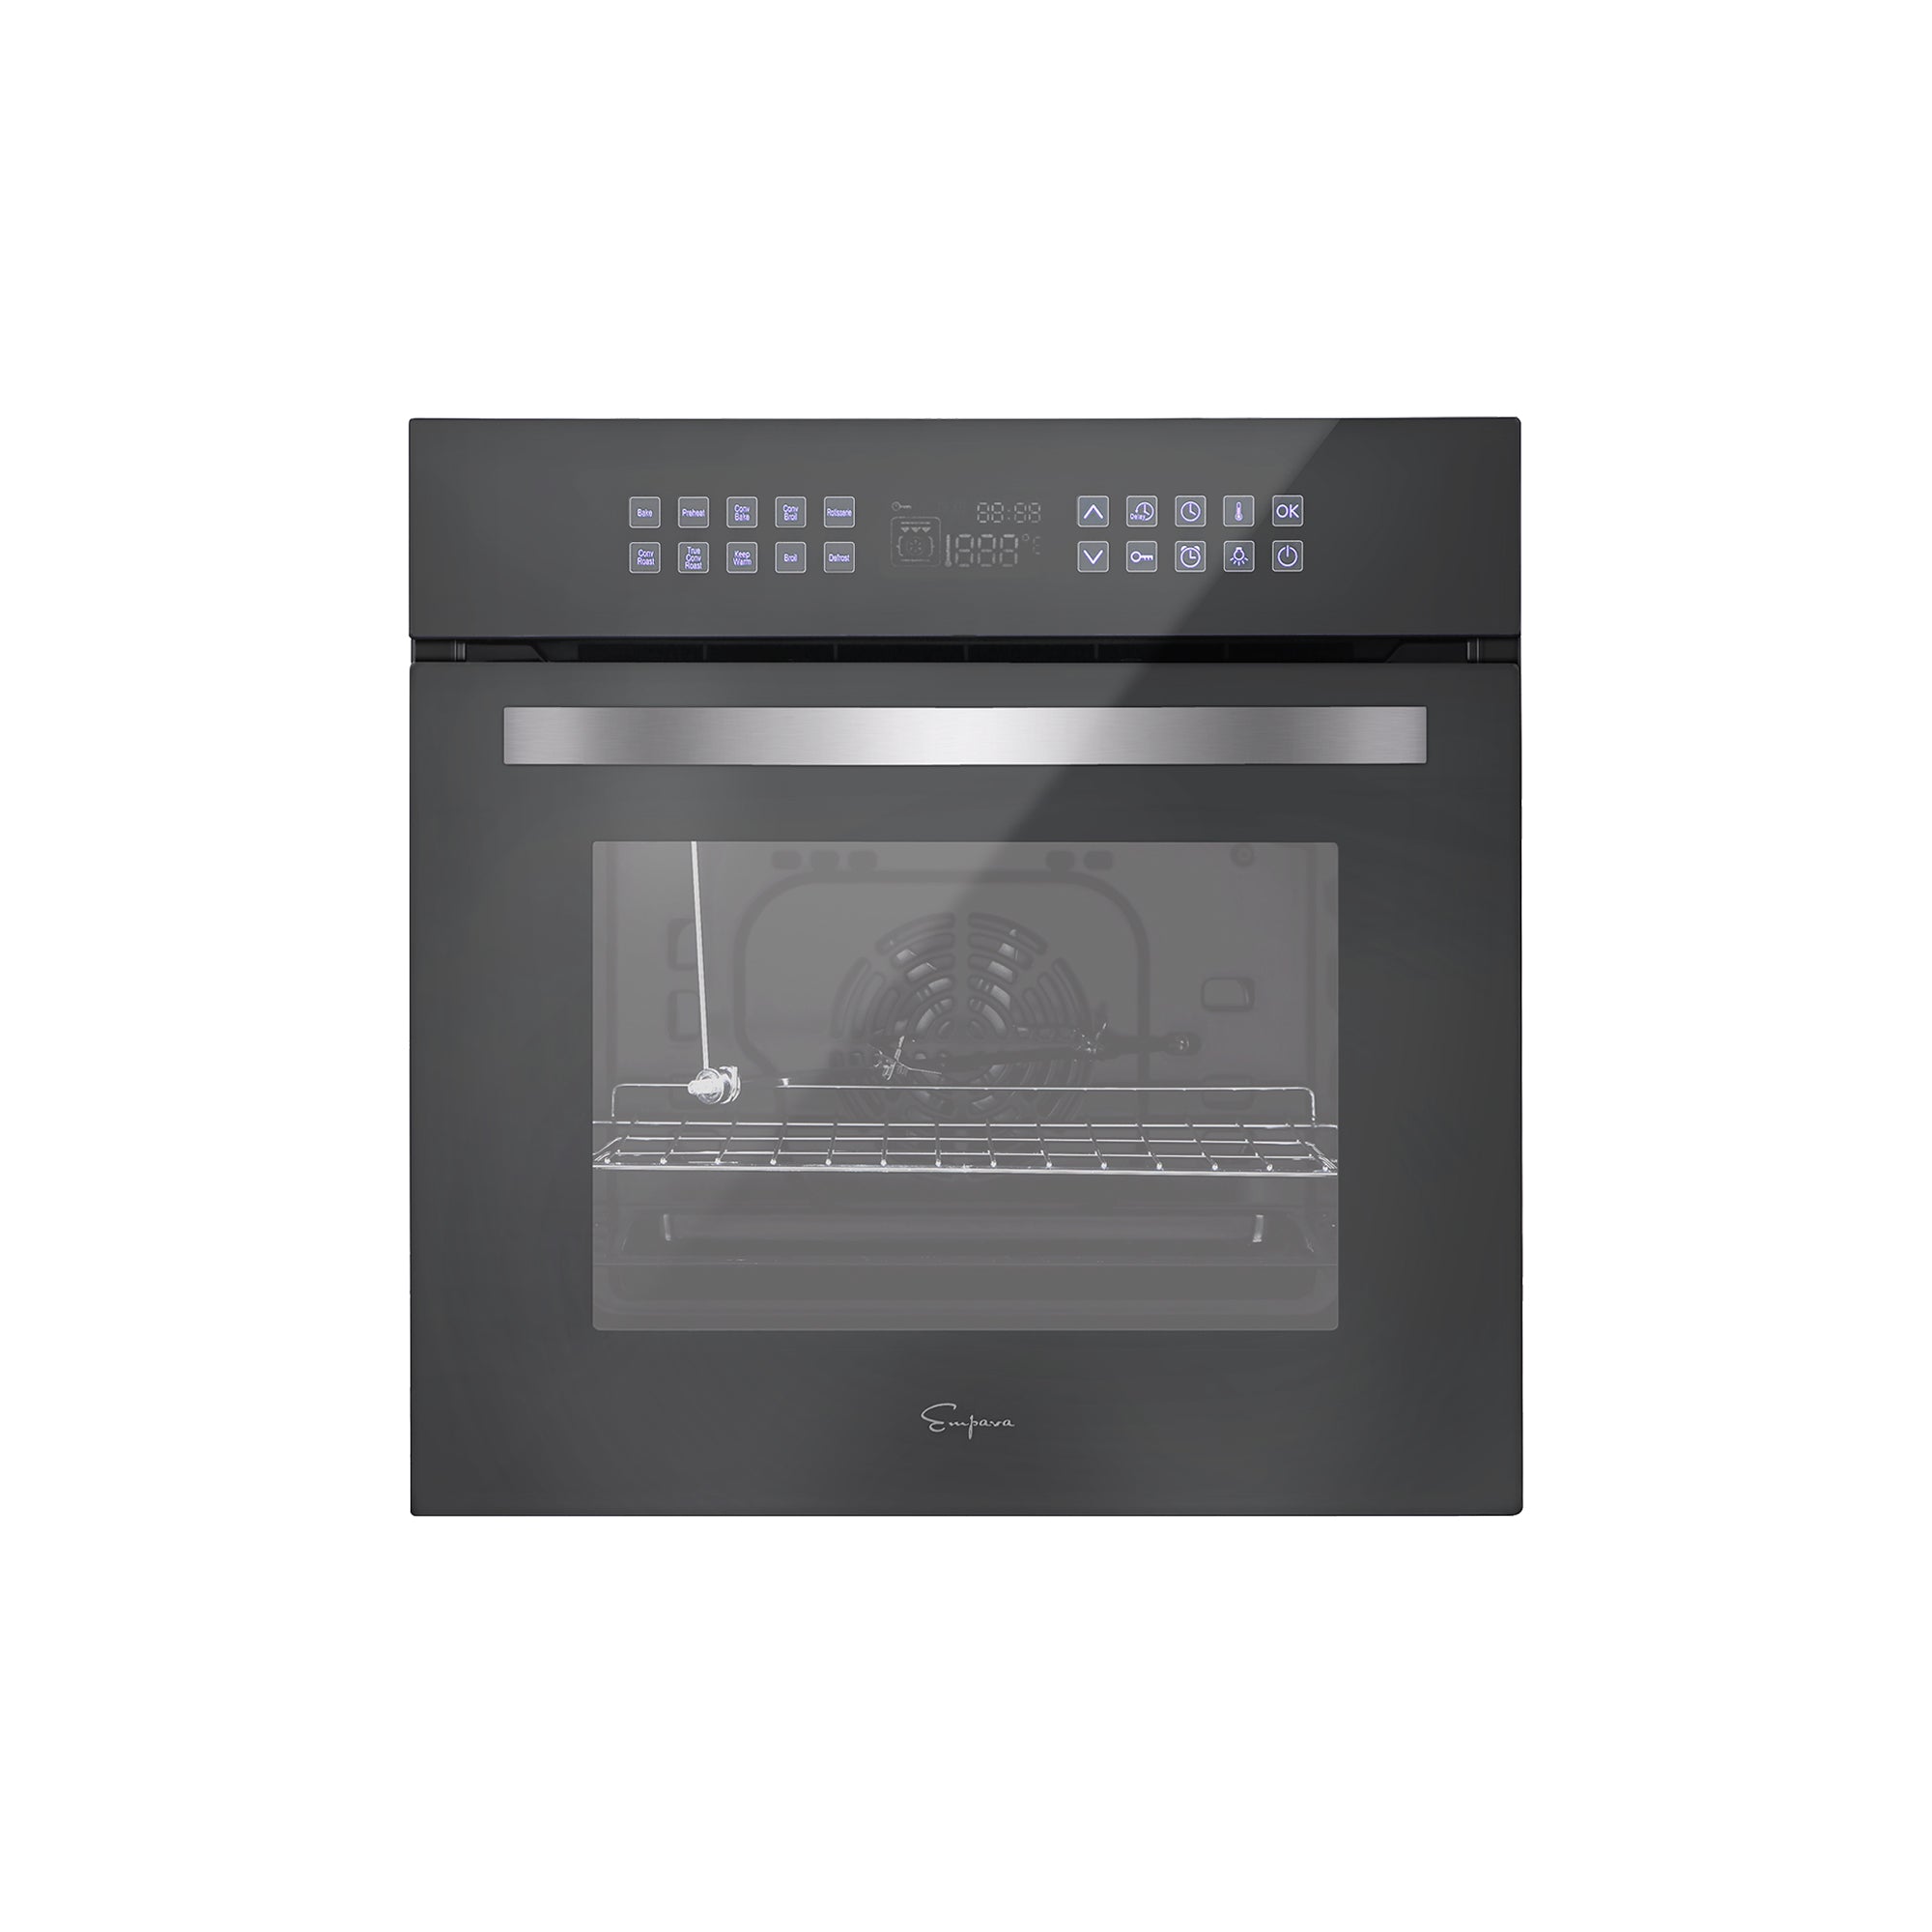 Empava 24WOC17 24 in. Electric Single Wall Oven